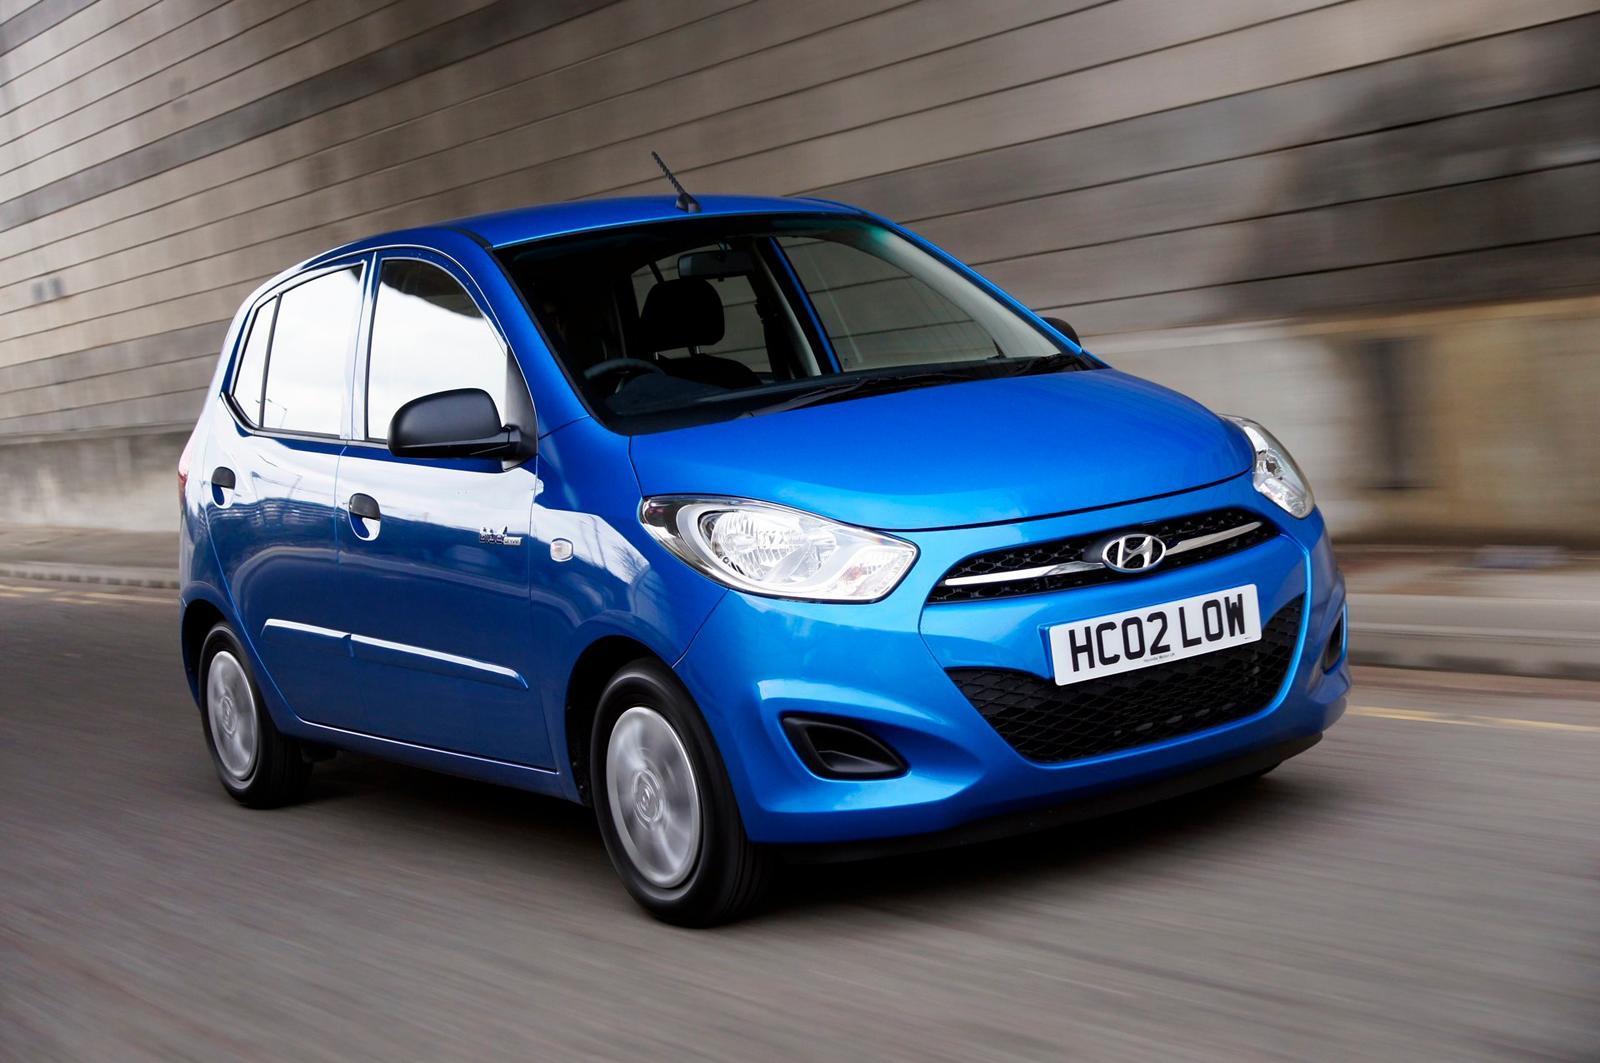 Hyundai i10 facelift 2011 photo 65913 pictures at high resolution